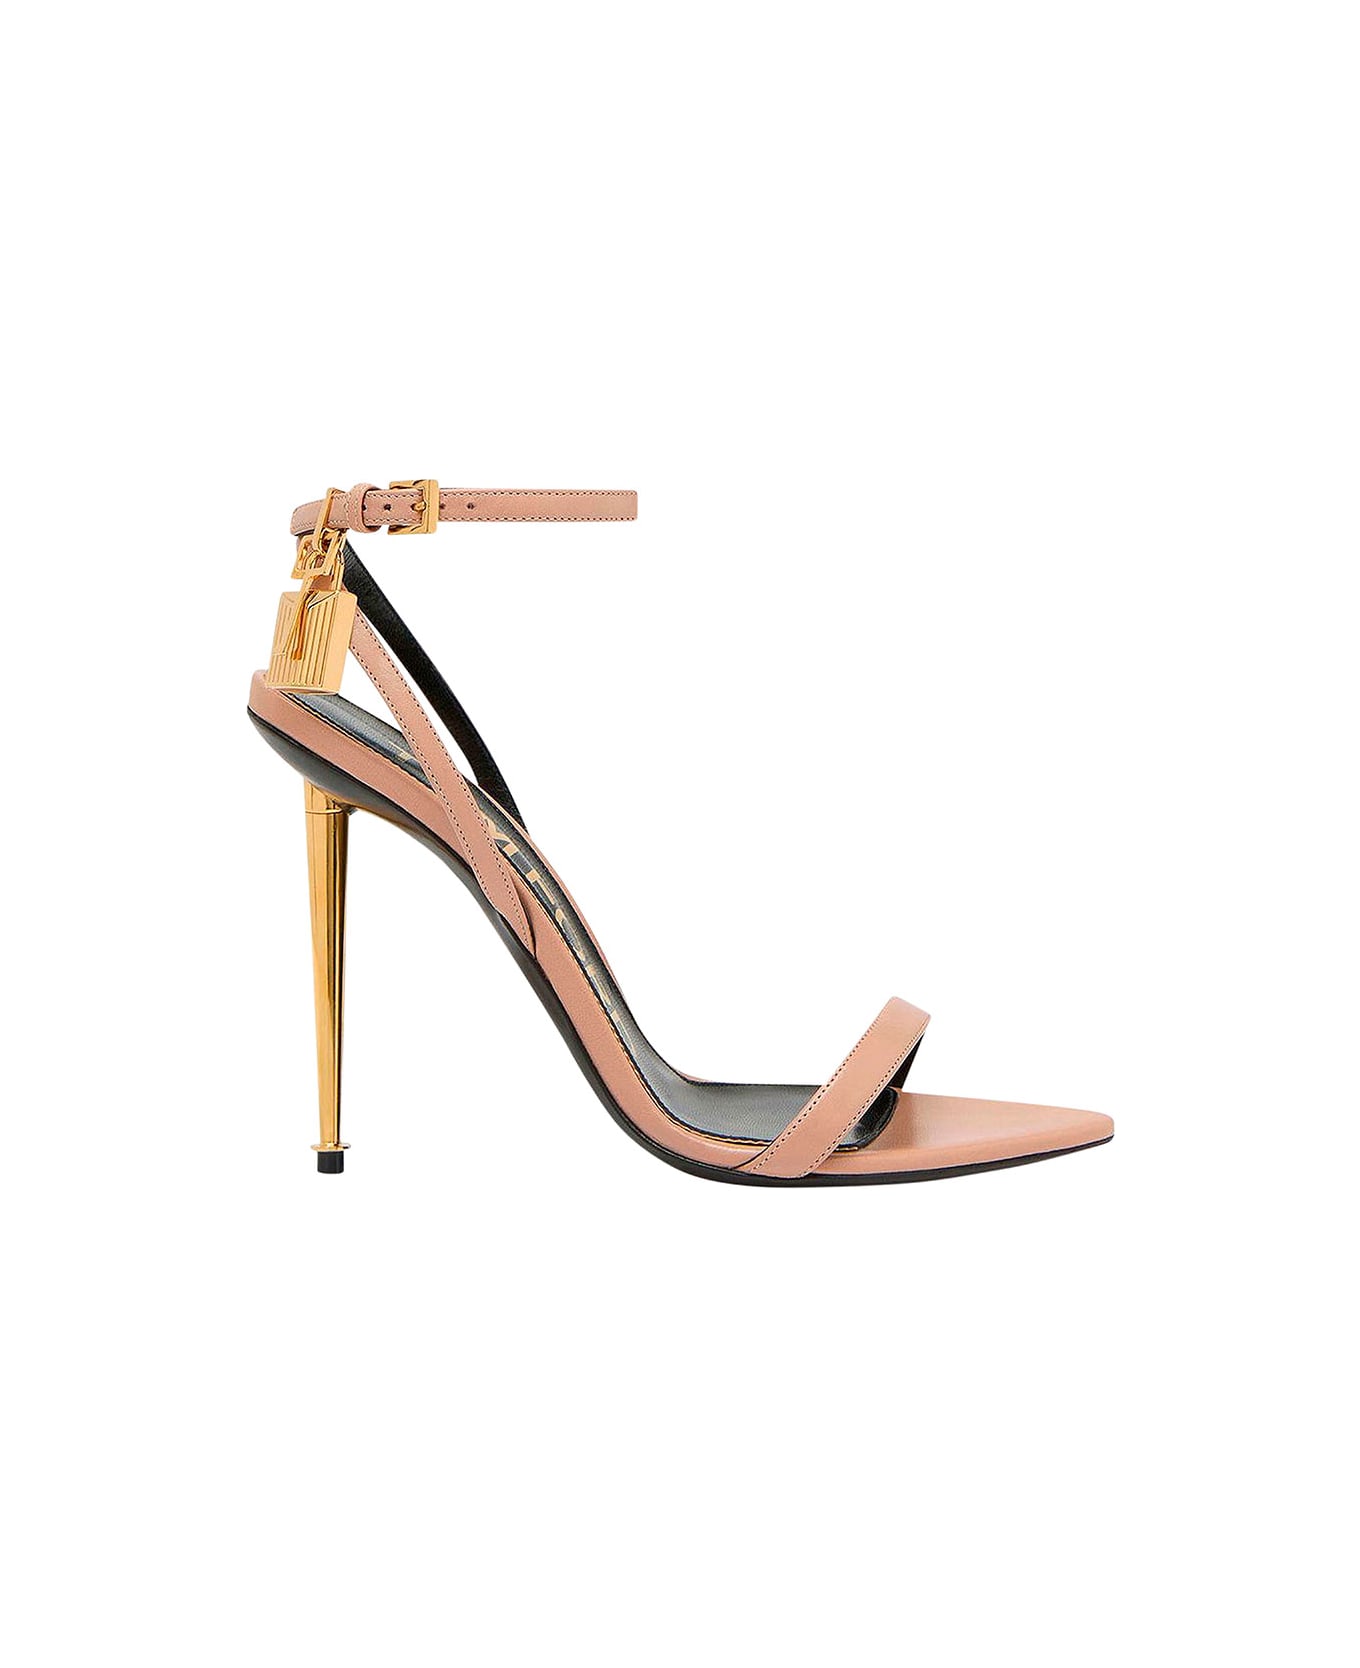 Tom Ford Pink Sandals With Metal Heel And Padlock In Leather Woman - Metallic